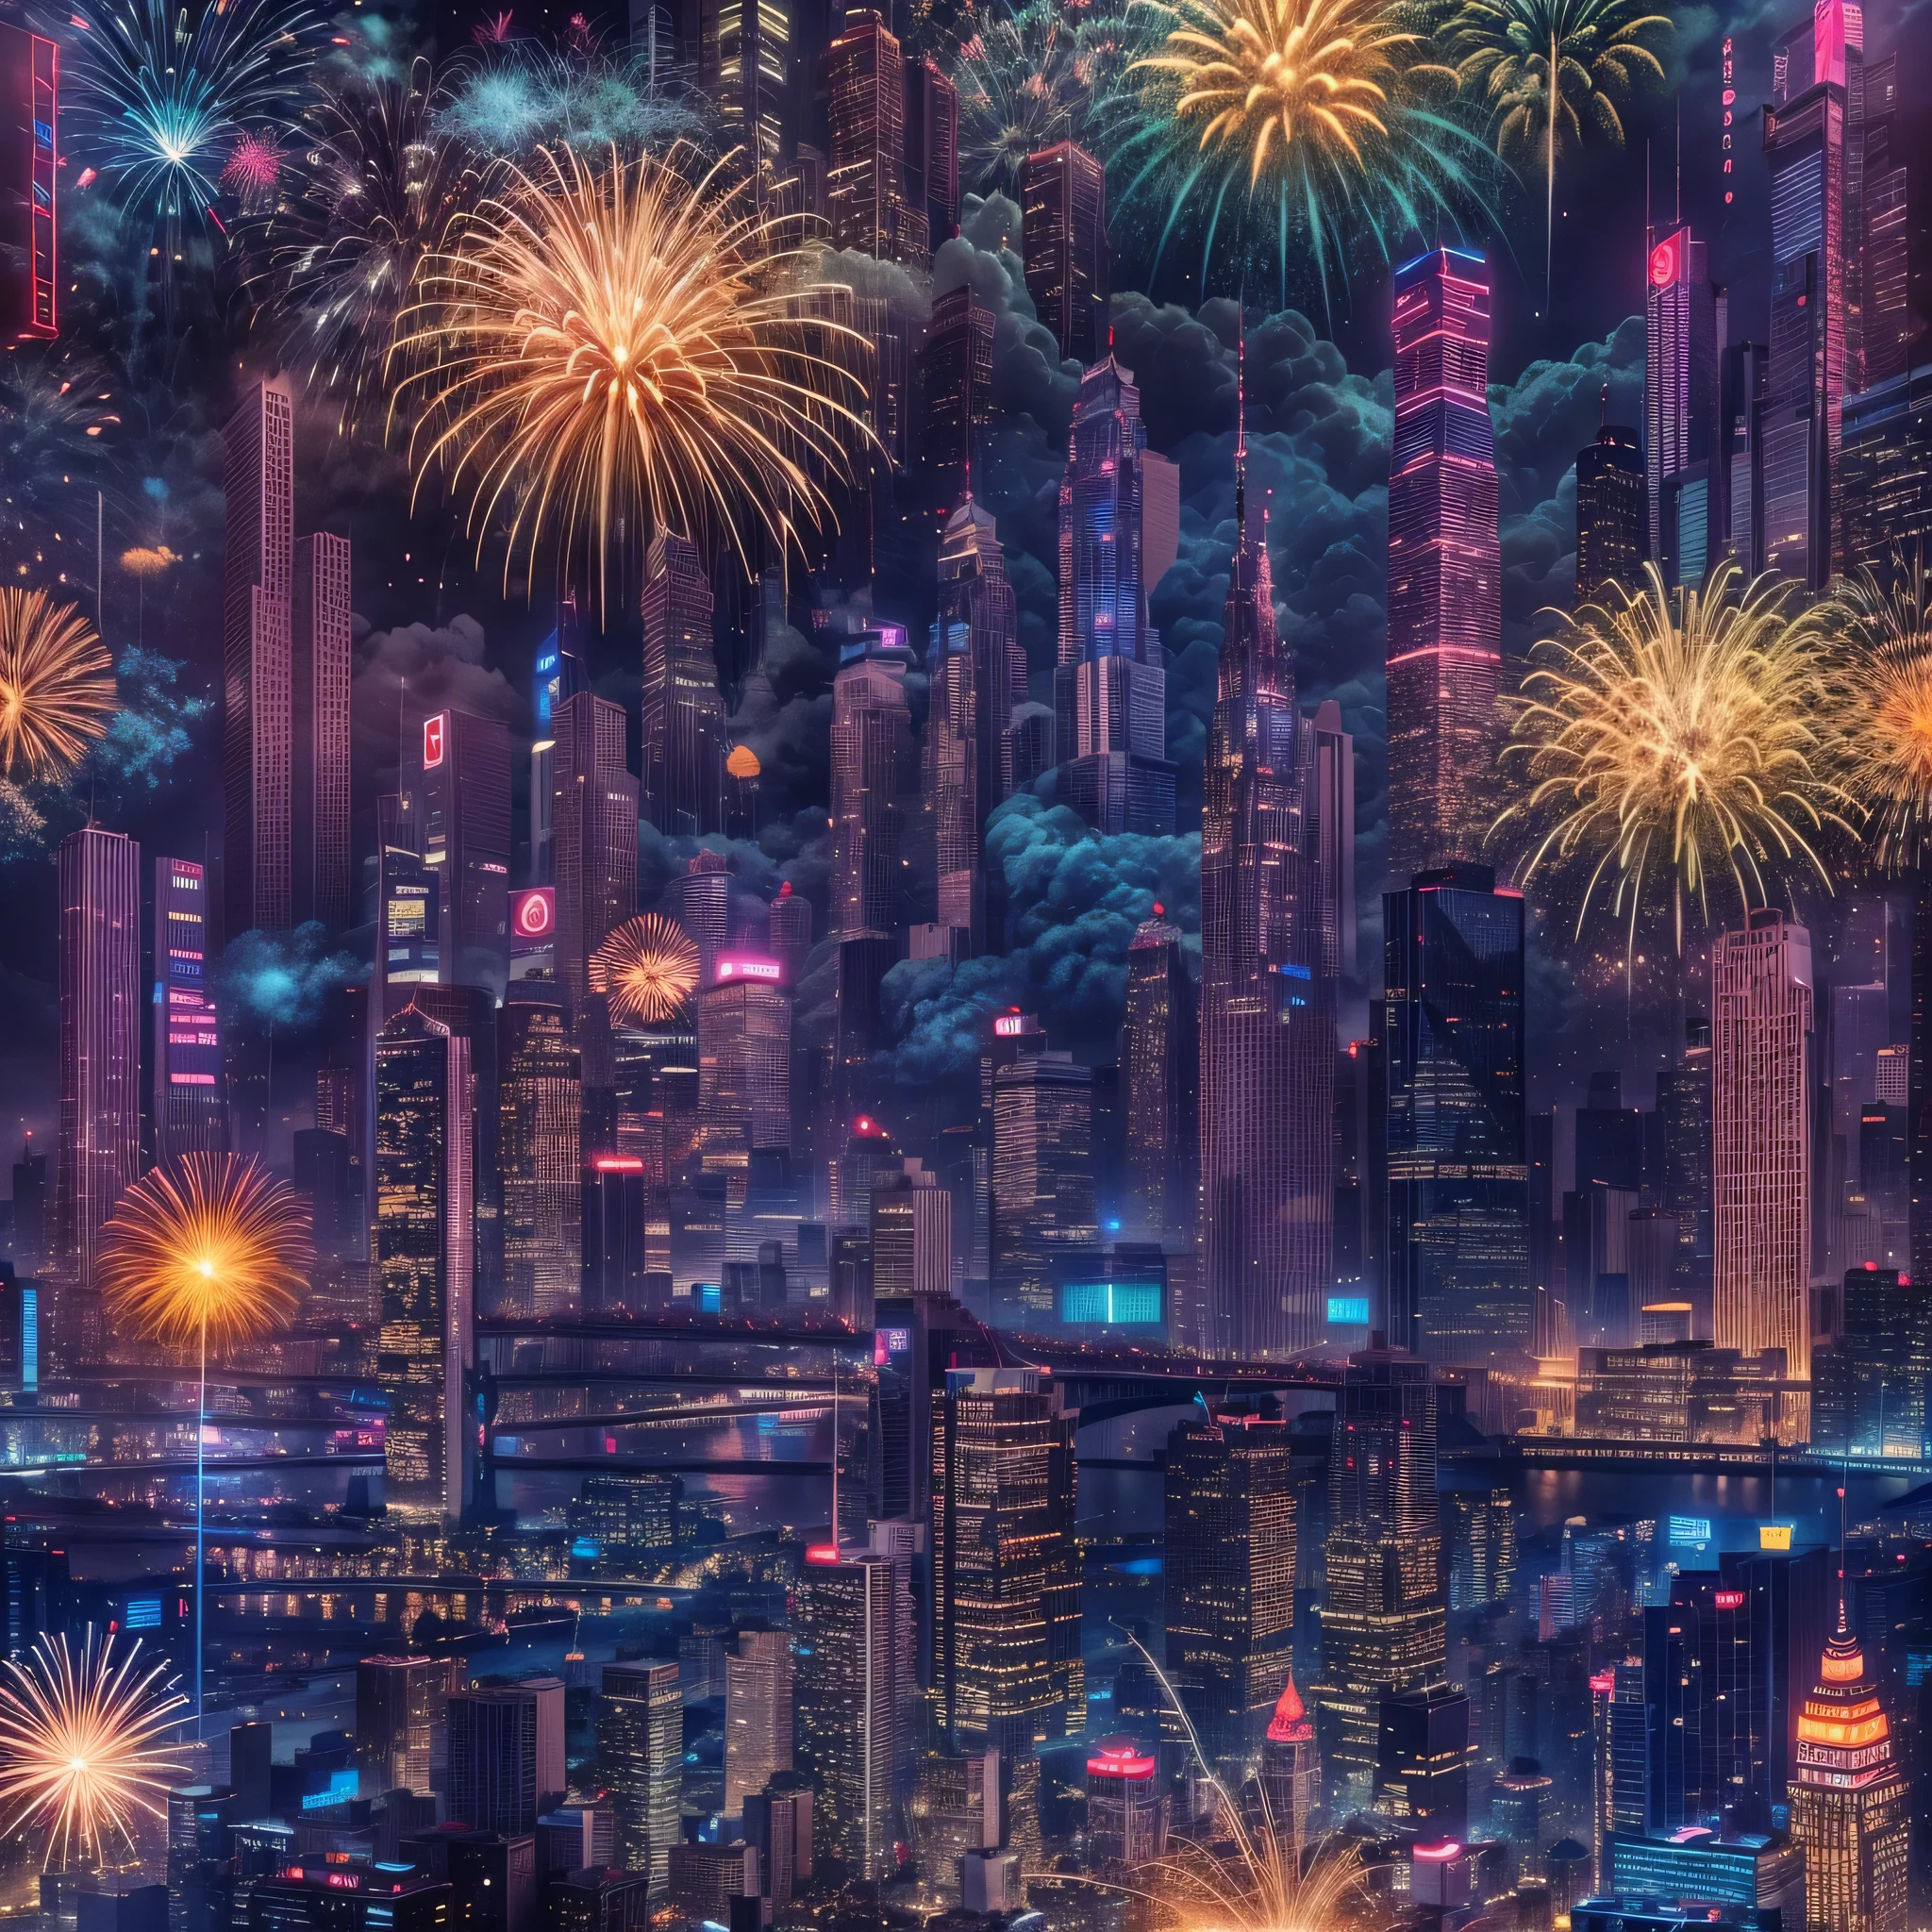 Cyberpunk Technology City，nighttime scene，Gorgeous fireworks，water cruise，Skyscrapers on both sides of the river，The prosperous metropolis of the future，urban lamplight show，Neon laser fireworks explode in the sky，Lots of fireworks，lamplight，